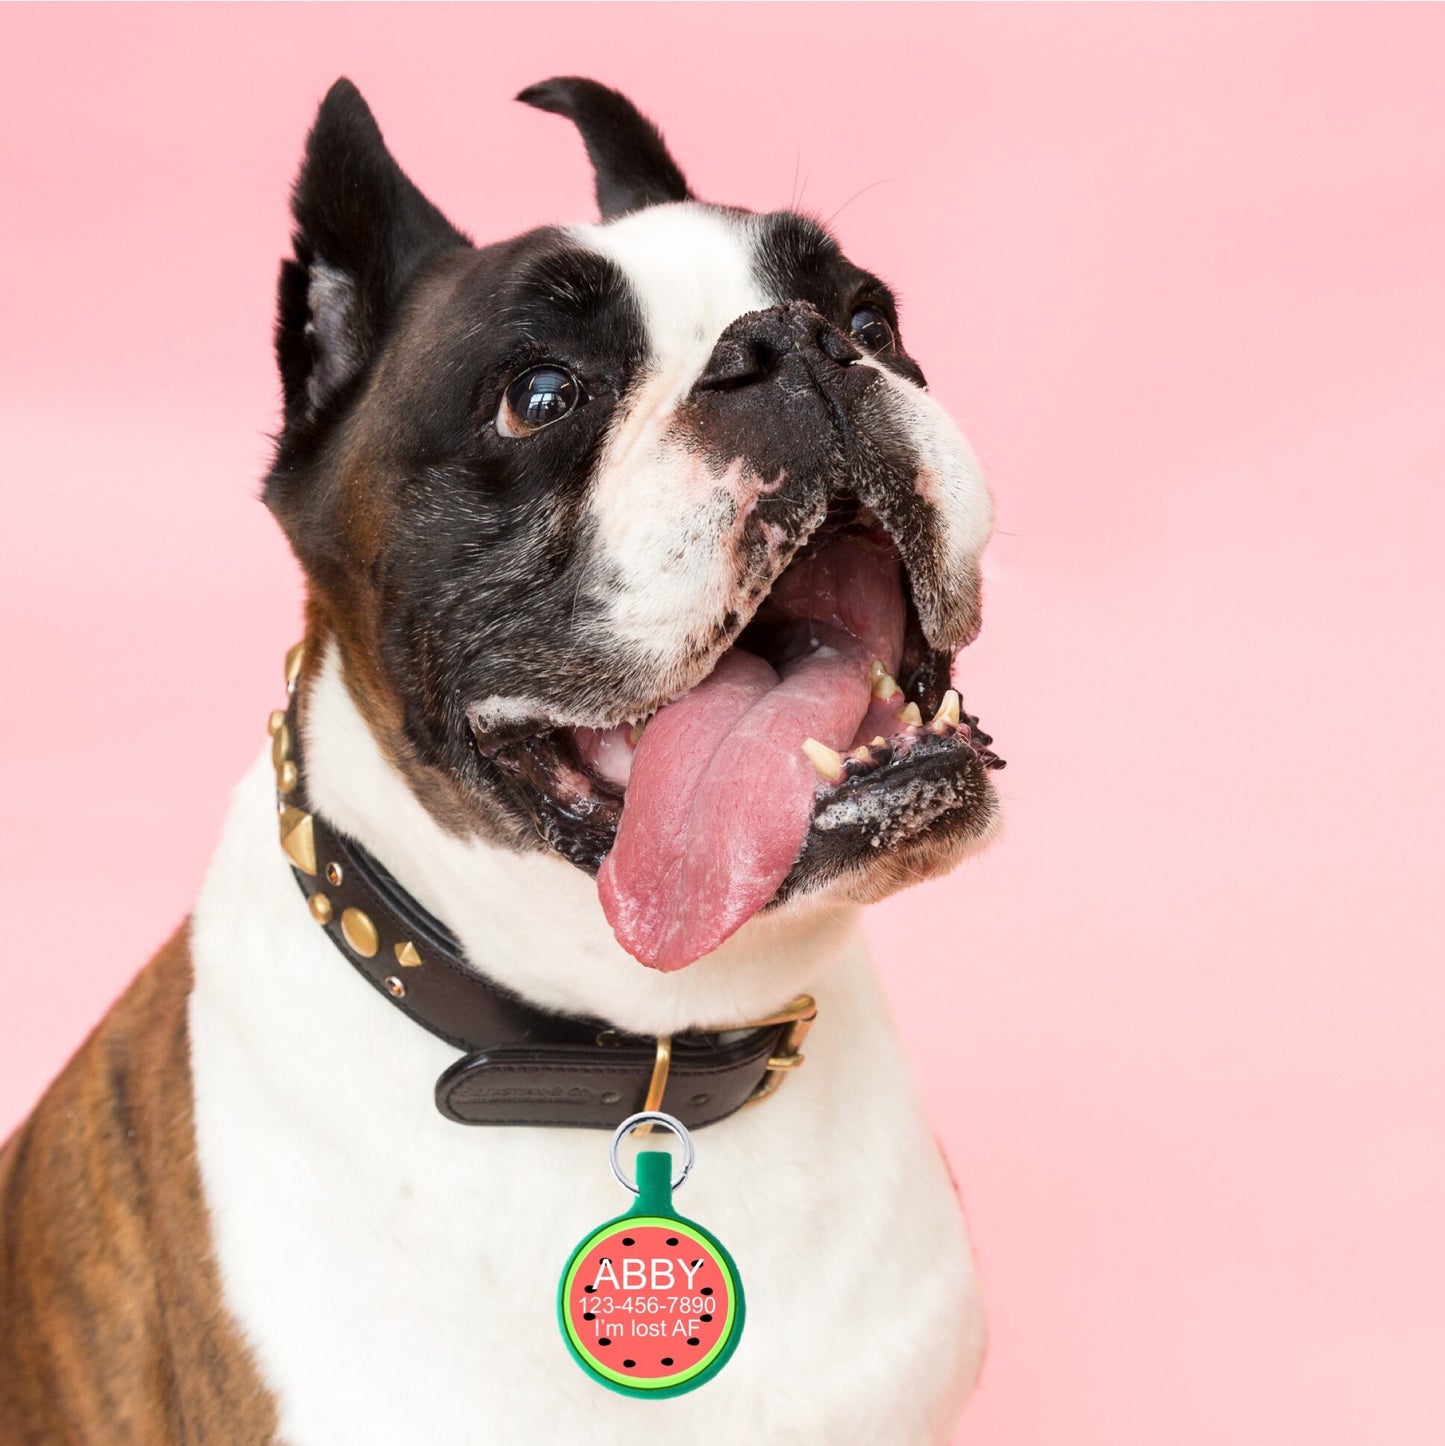 Watermelon Cute Pet ID Tag Eco Friendly Tag for Dogs and Cats 3D